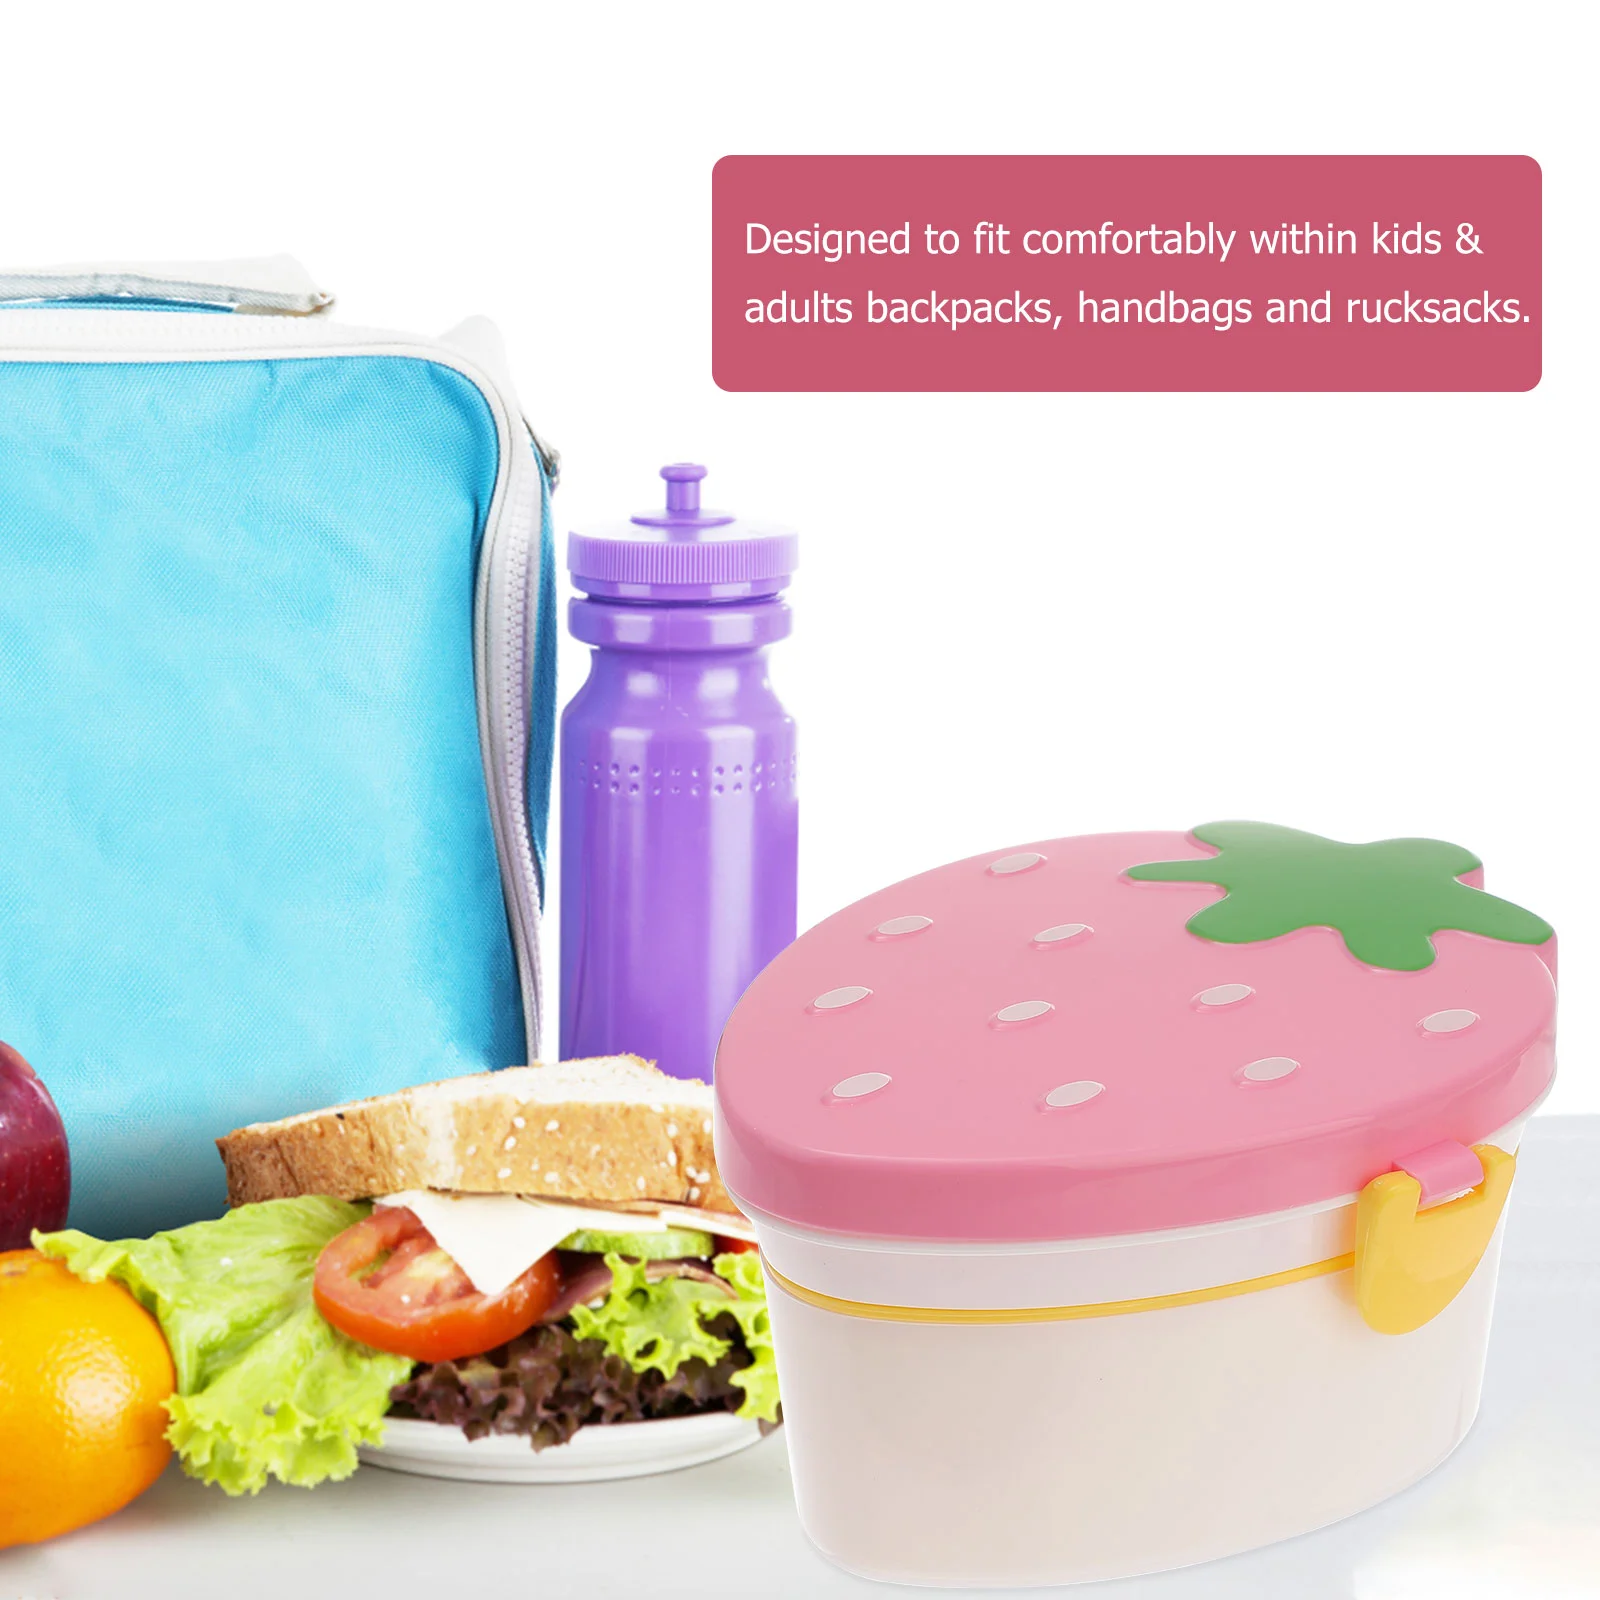 

Box Lunch Bento Kids Container Containers Forfoodstackable Tier Insulation Sandwich Layer Double Compartment Layers Meal